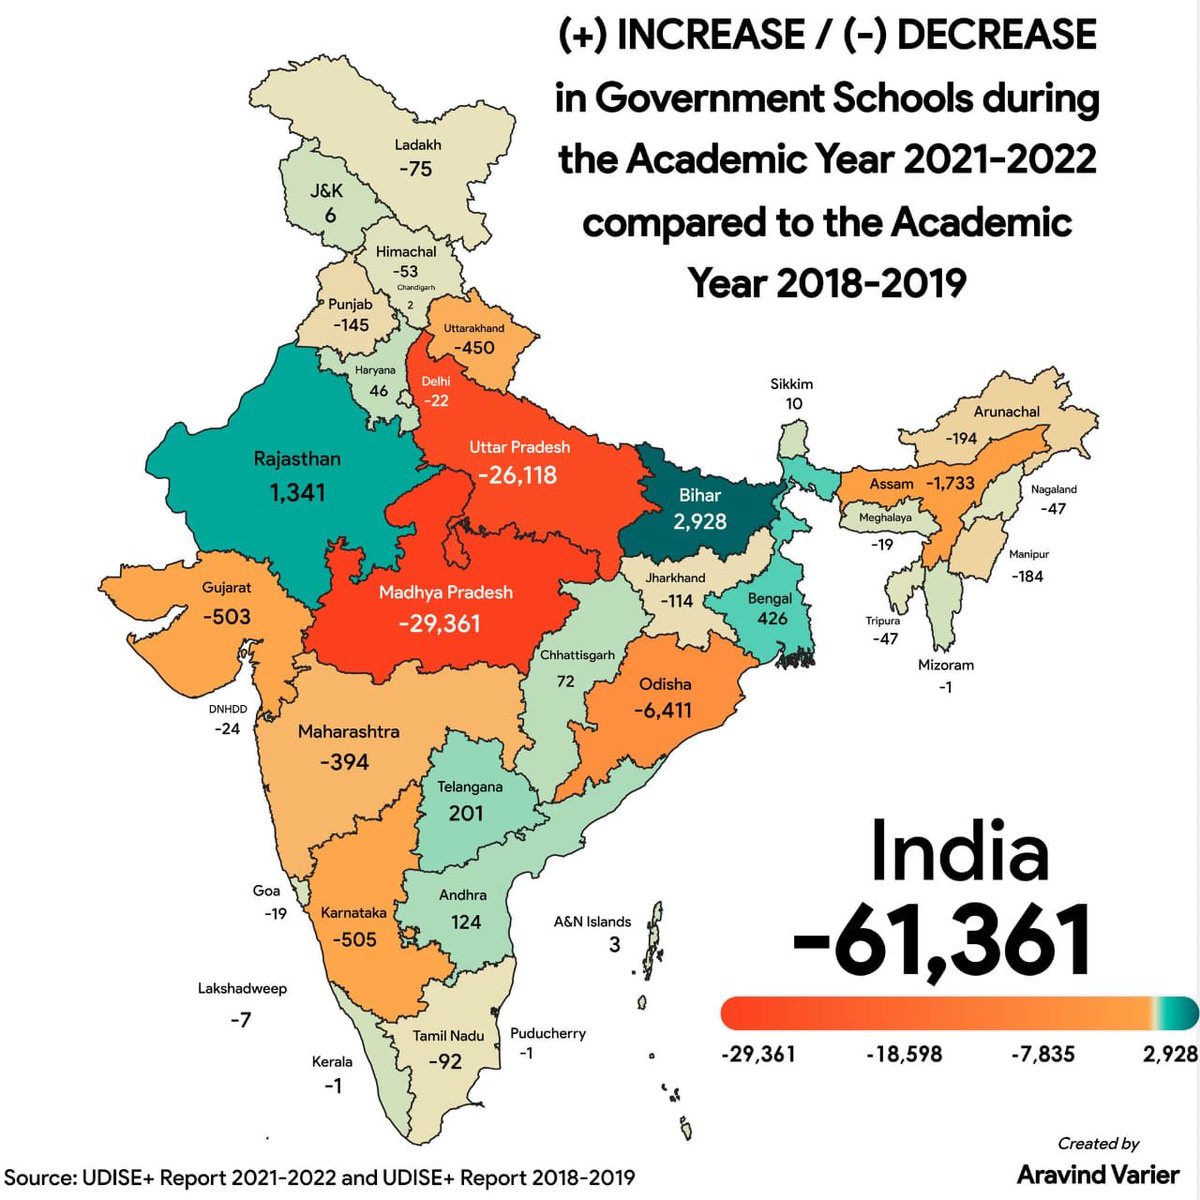 The number of government schools in India went down by 61,000+ in 3 years.

Alarming stats!!!